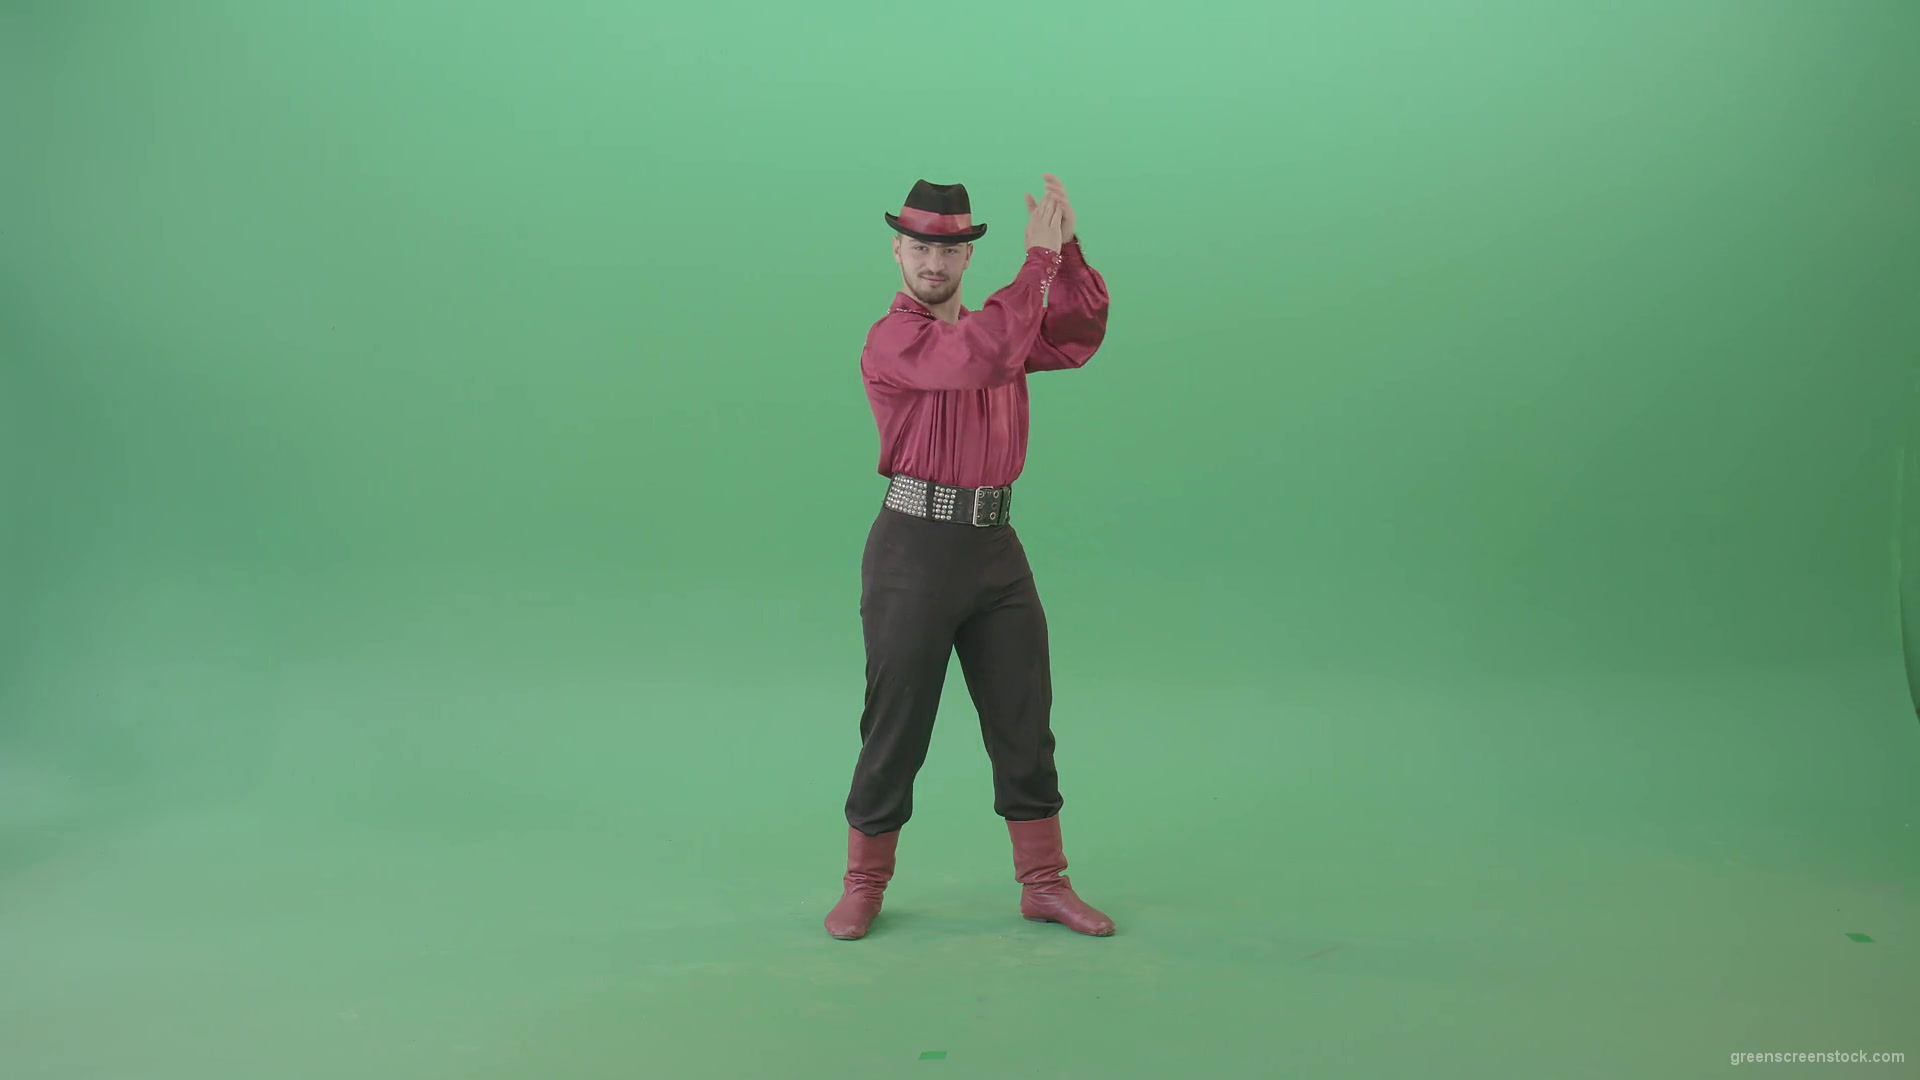 Modovian-Balkan-Gipsy-man-clapping-hands-isolalated-on-green-screen-4K-Video-Footage-1920_007 Green Screen Stock